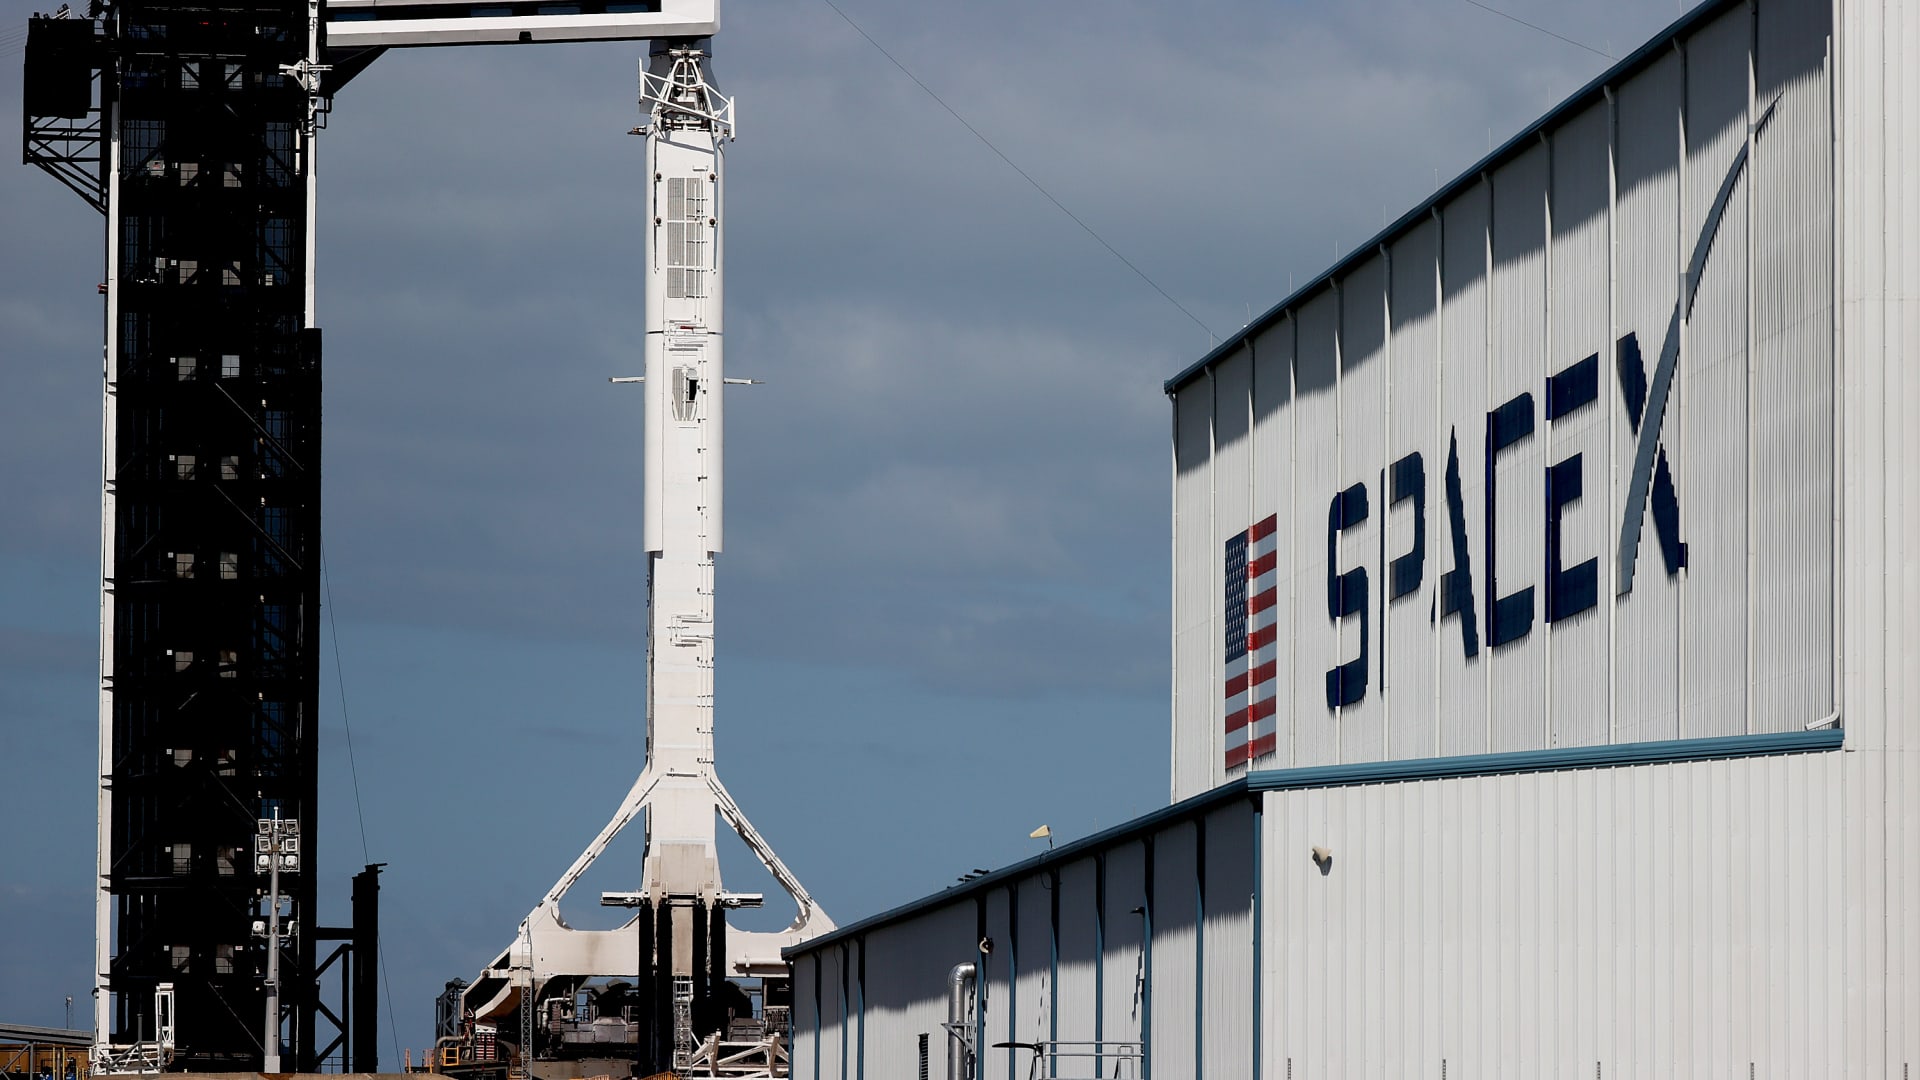 Europe eyes Musk's SpaceX to replace Russian rockets - CNBC